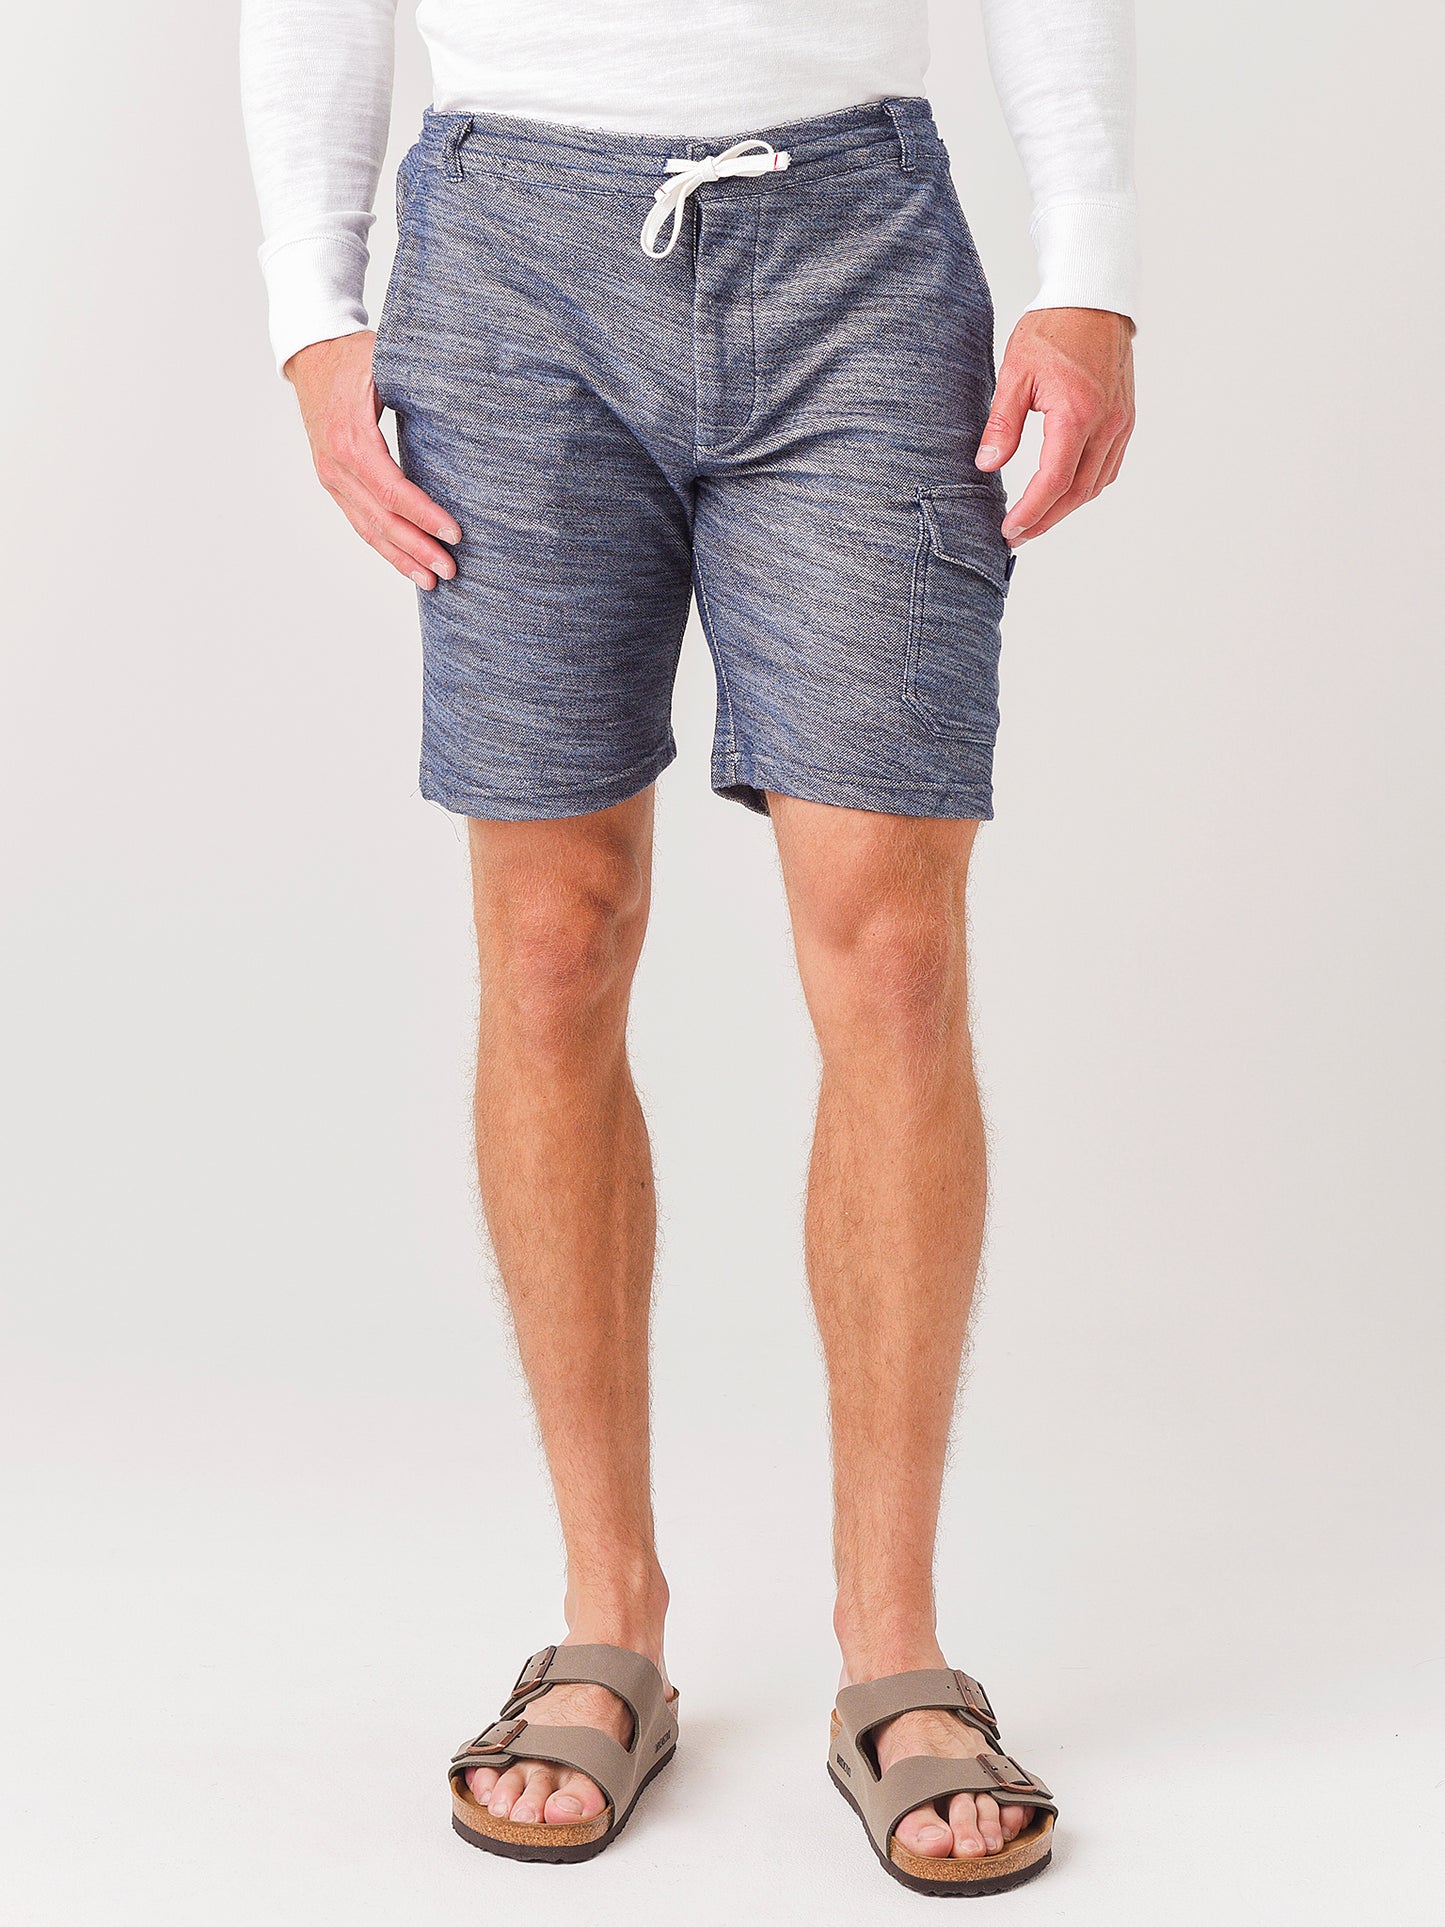 Johnnie-O Men's Boardy Lounger Pull-On Short